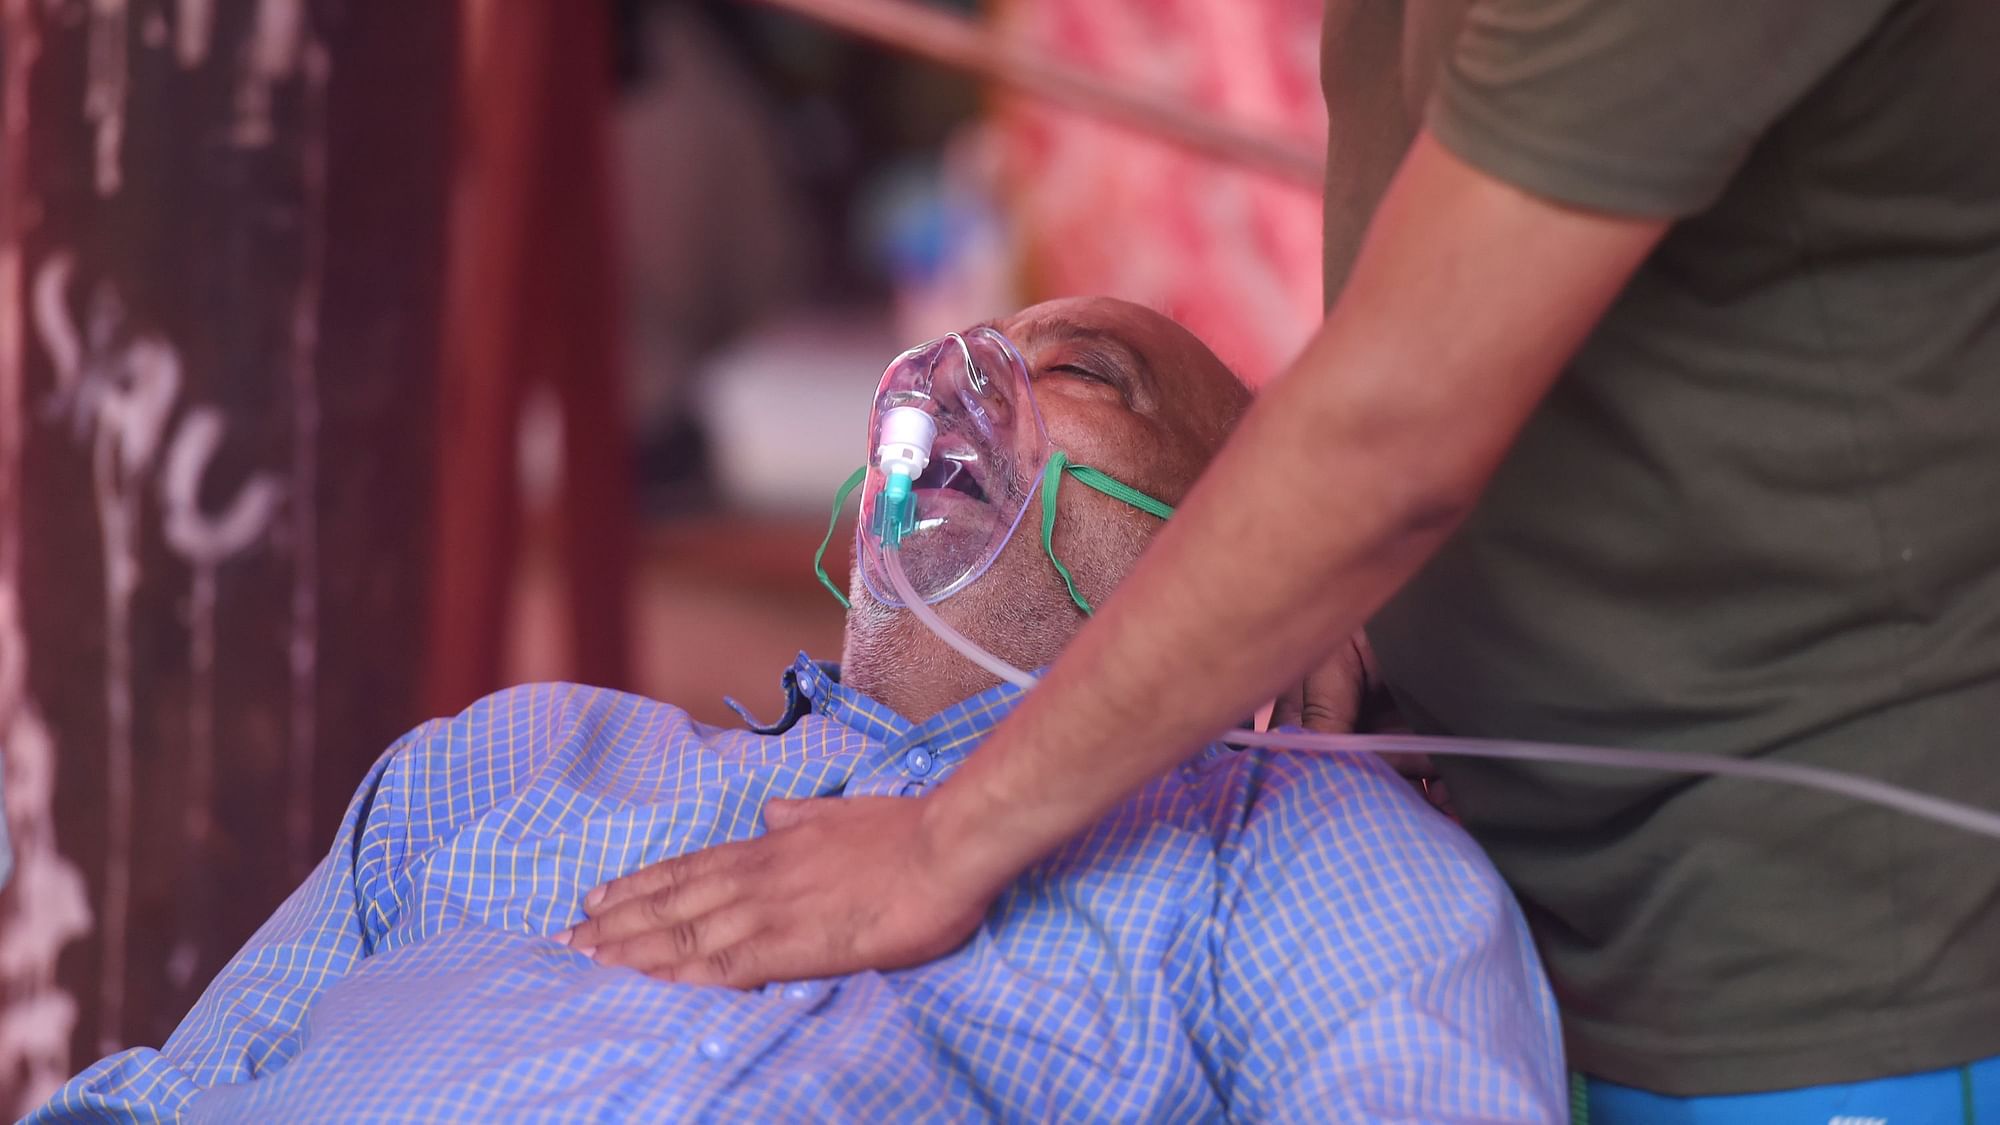 The Allahabad High Court on Tuesday, 4 May, hauled up the Uttar Pradesh government over COVID-19 deaths amid oxygen shortage in the state.